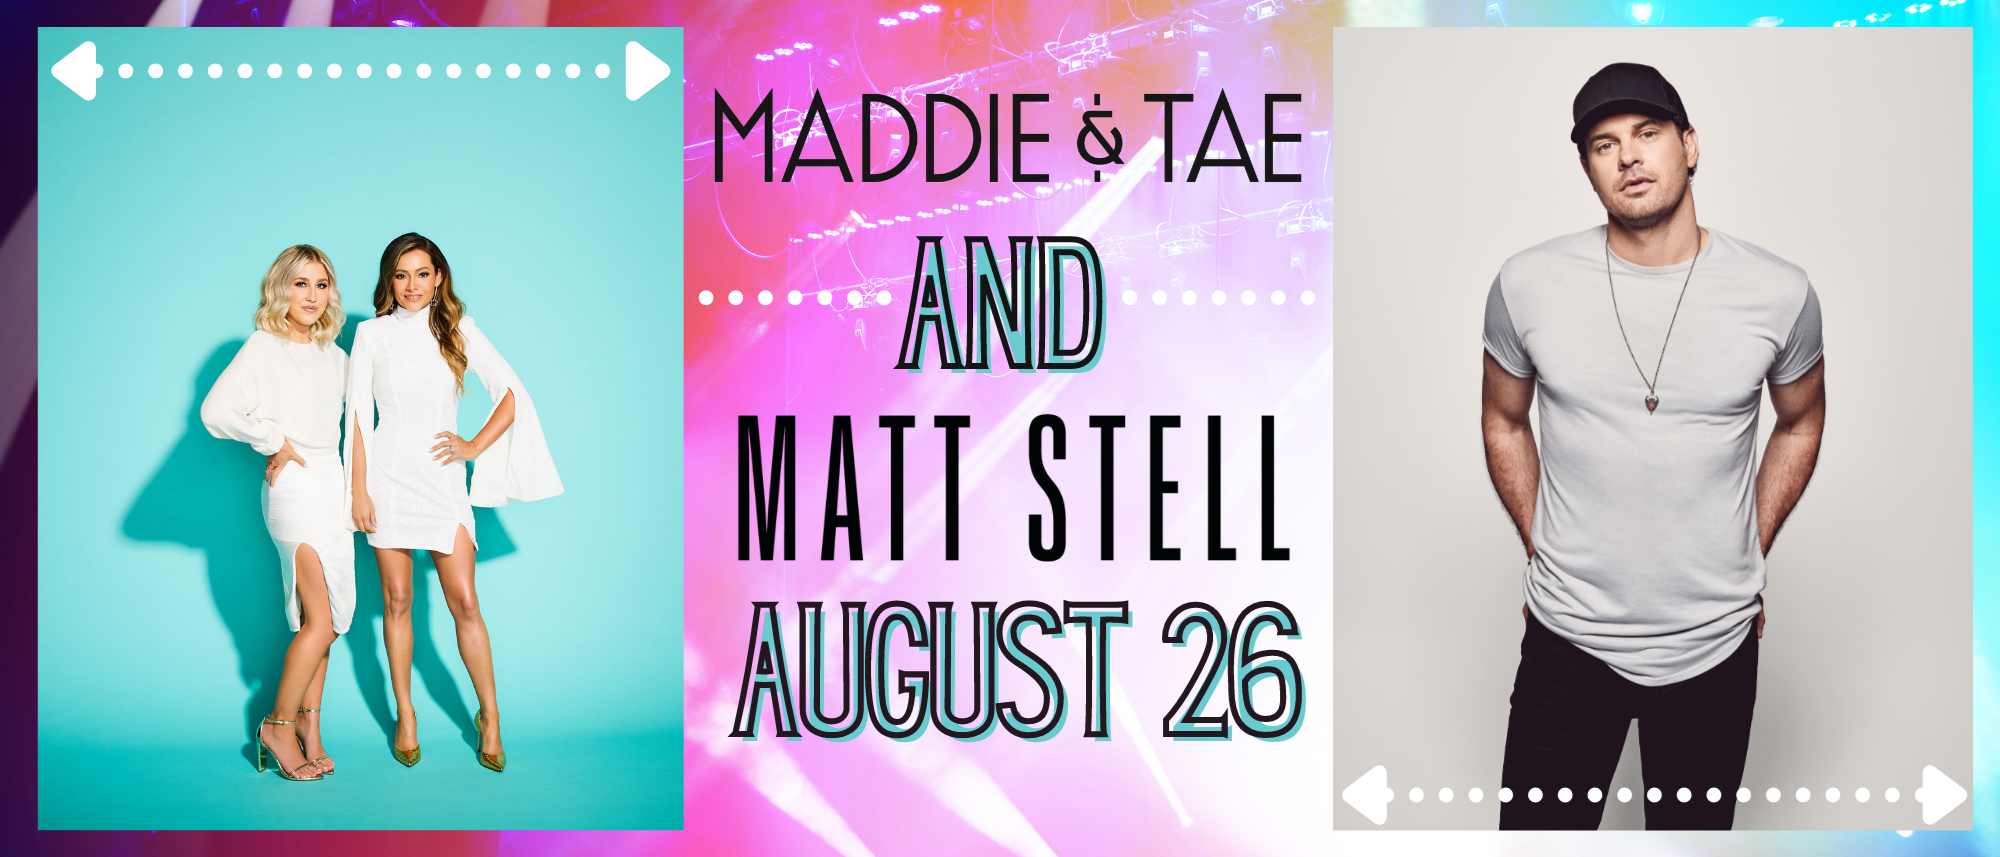 <h1 class="tribe-events-single-event-title">Maddie & Tae AND Matt Stell</h1>